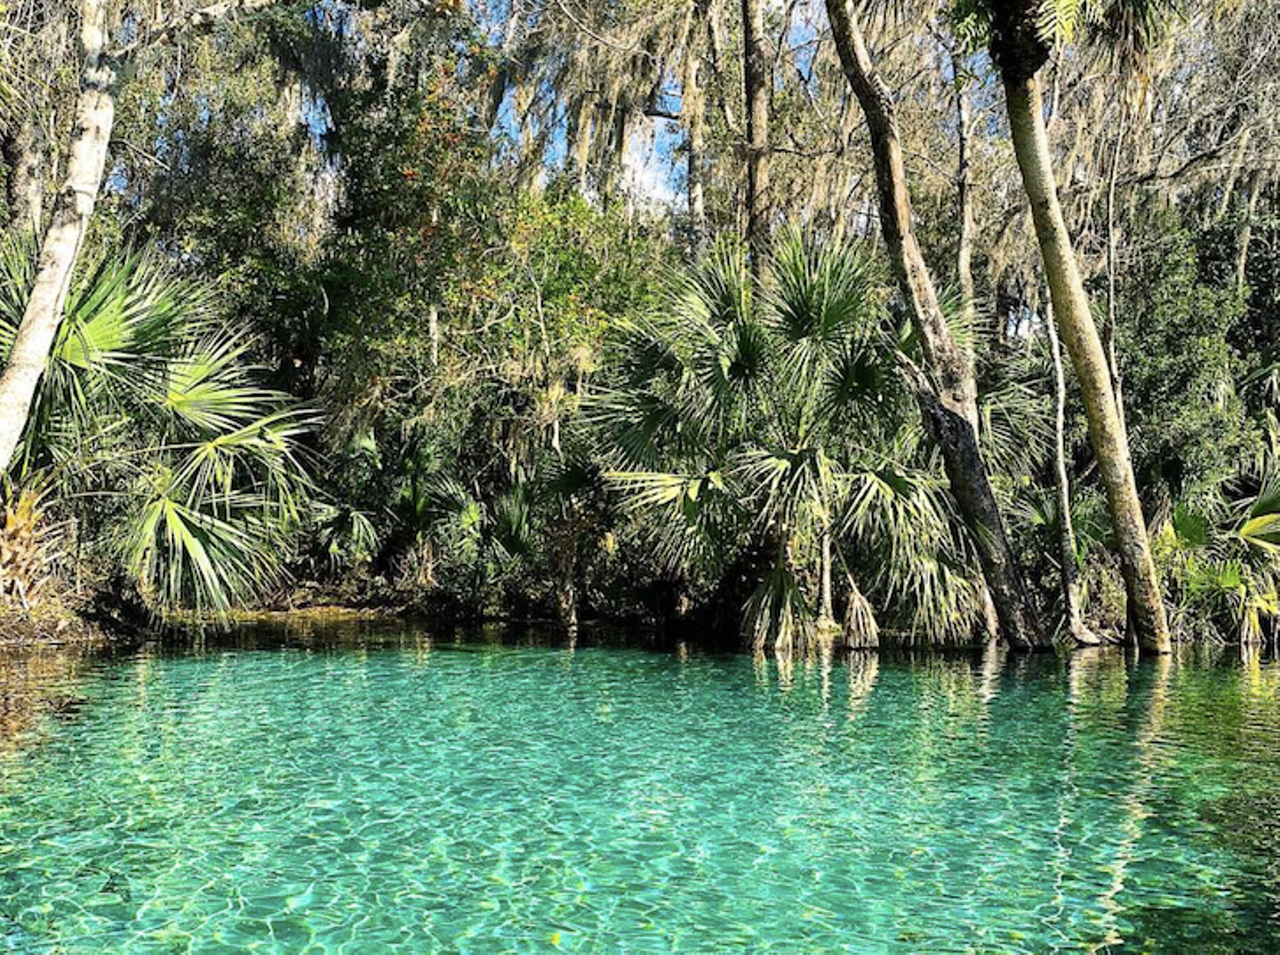 Rainbow Springs State Park
Estimated drive from Tampa: 45 minutes
The crisp cerulean water here has been in use for close to 10,000 years, according to archeological studies. You can swim, snorkel and kayak your way to leisure in this spring, which is Florida&#146;s fourth largest.
Photo via Florida State Parks/Facebook